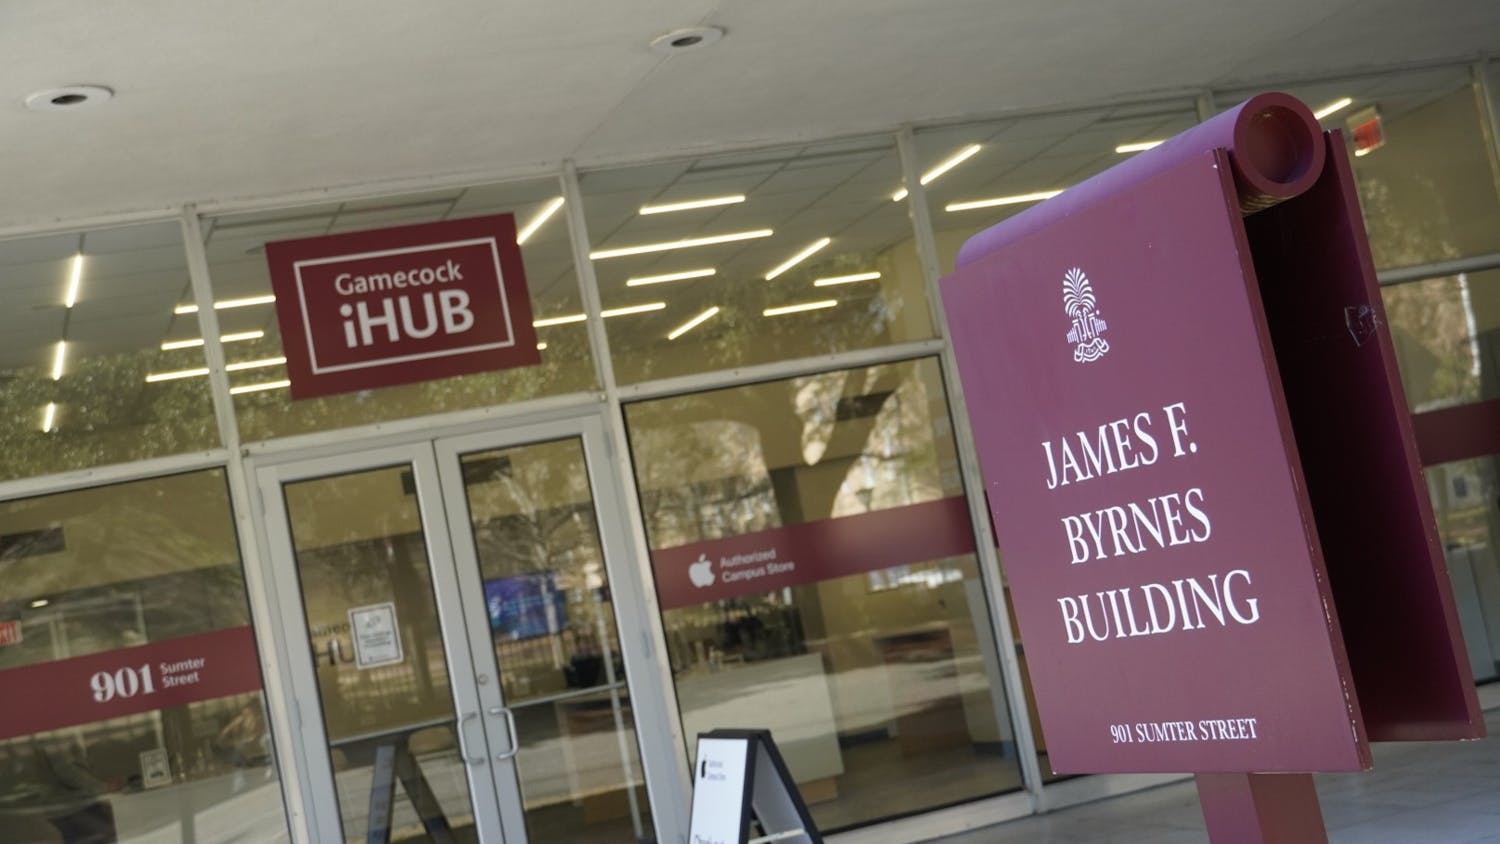 Exterior of the James F. Byrnes Building located at 901 Sumter St. on Feb. 1, 2022. Following the formation of the Title IX task force the building serves as the location for the office of new Assistant Vice President for Civil Rights Molly Peirano.